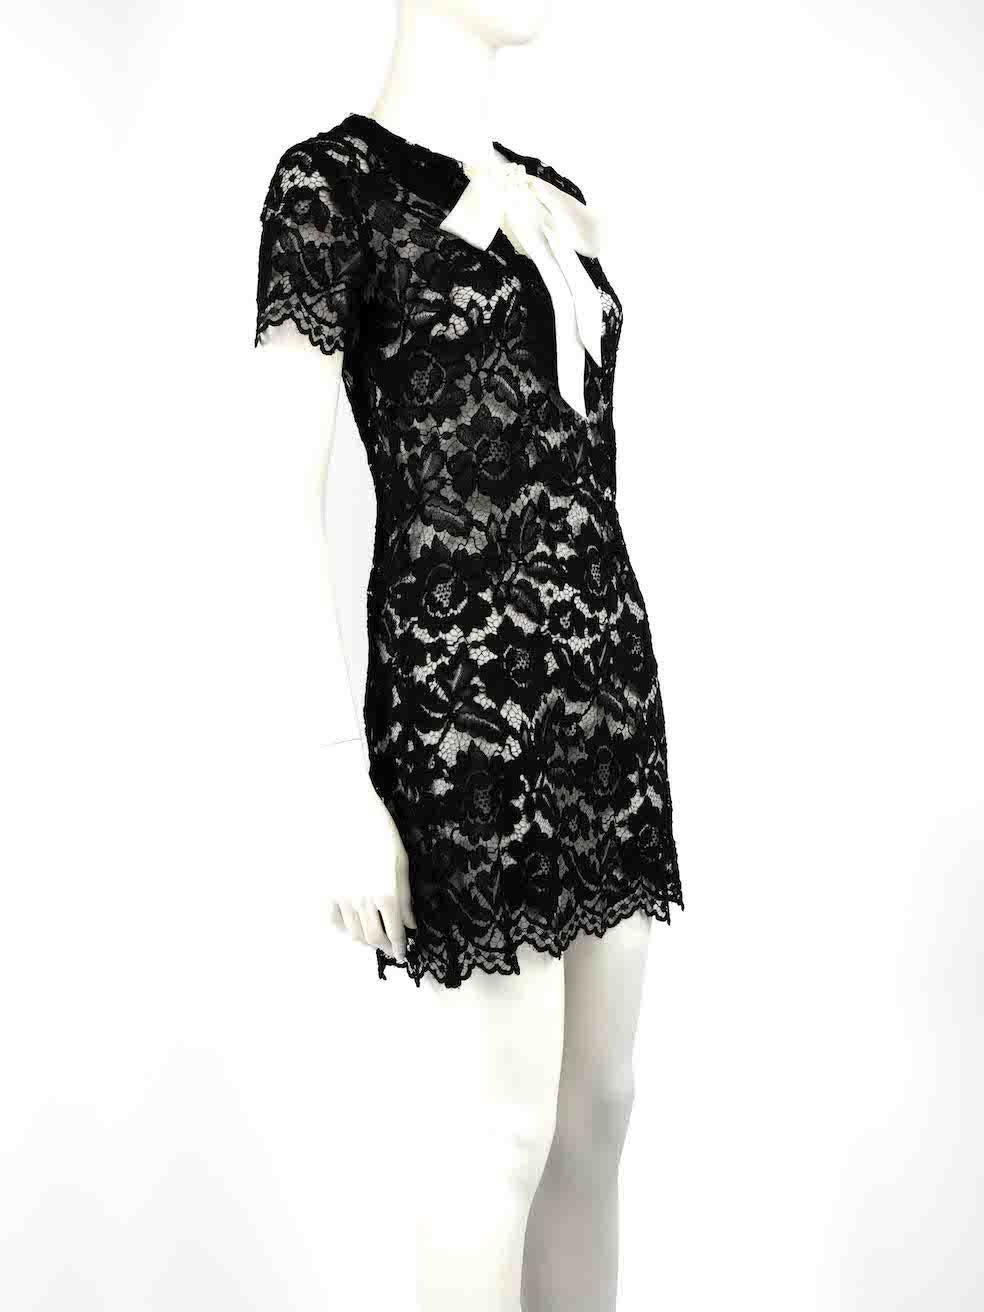 CONDITION is Good. Minor wear to dress is evident. Light wear to the lace with slight unravelling at the front and there is a small mark on the neck tie on this used Sandro designer resale item.
 
 
 
 Details
 
 
 Black
 
 Lace
 
 Dress
 
 See